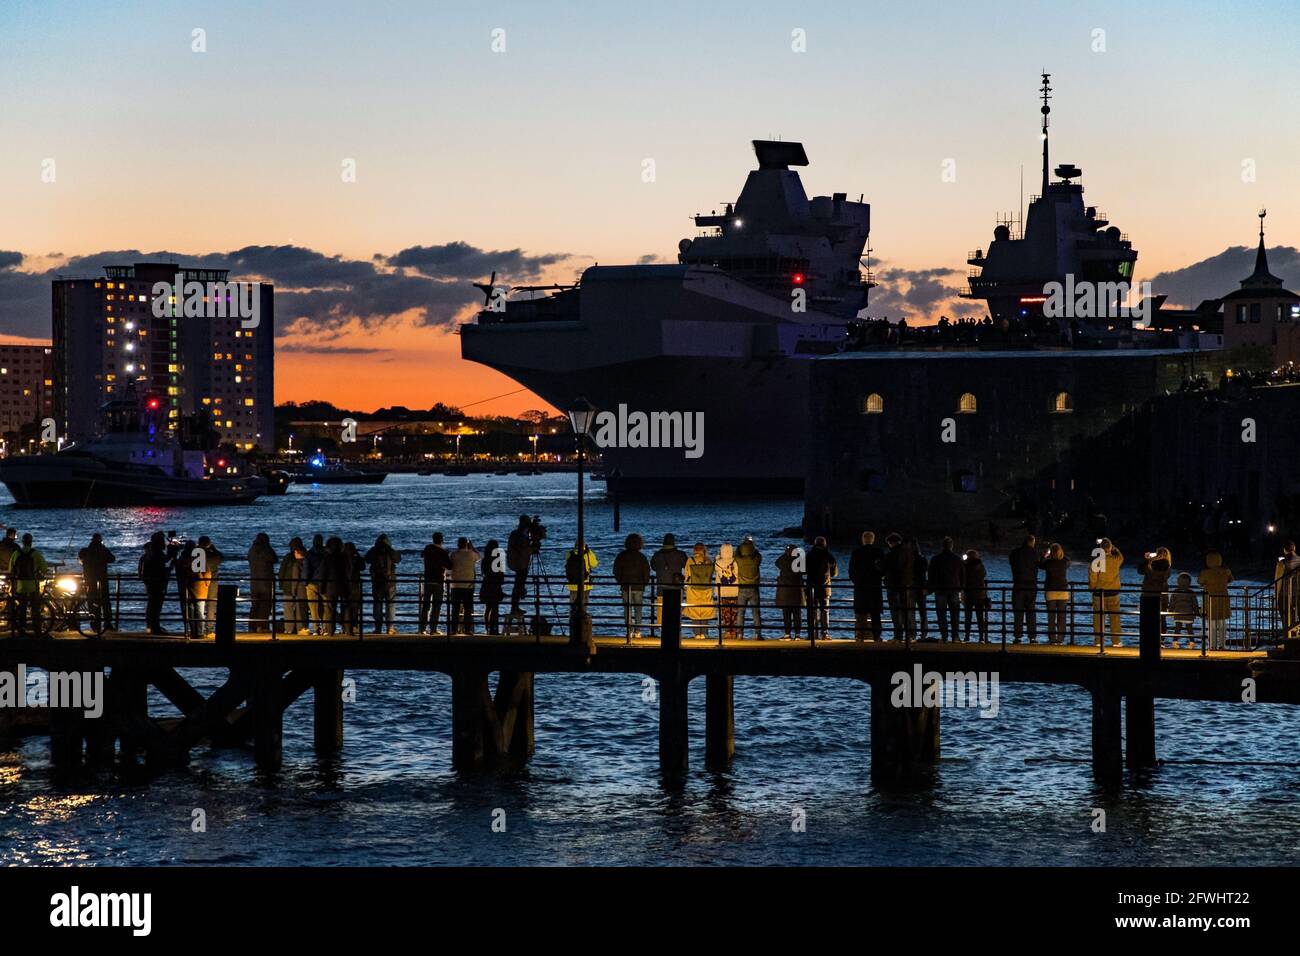 Dusk departure for HMS Queen Elizabeth from Portsmouth, UK on the 22nd May 2021 for the start of it's Carrier Strike Group Indo-Pacific deployment. F-35B Lightning II fighter aircraft are arranged on the flight deck of the ship. Stock Photo